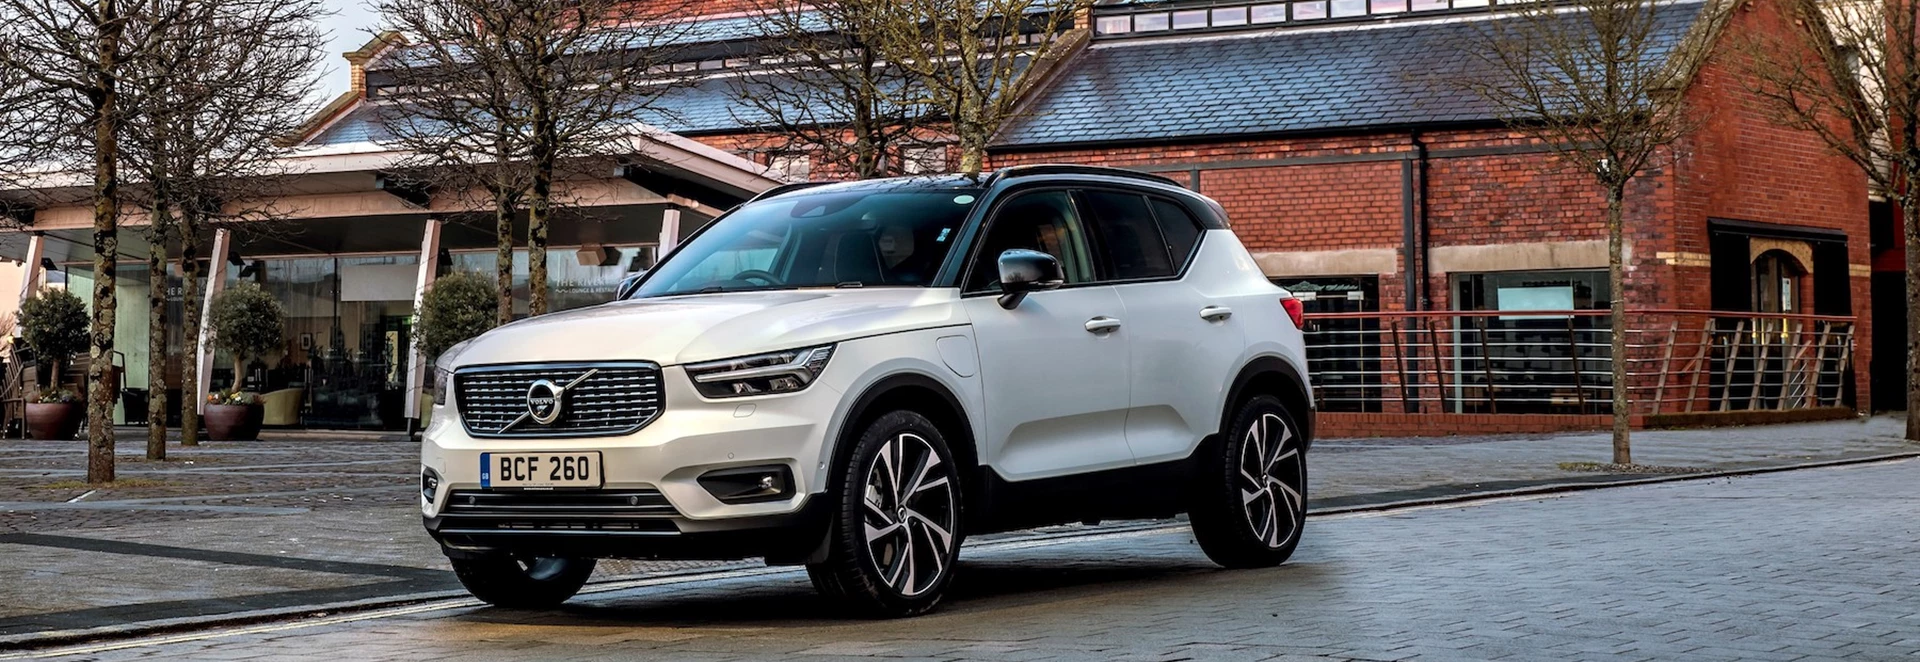 Volvo XC40 Recharge T5 plug-in hybrid 2020 review